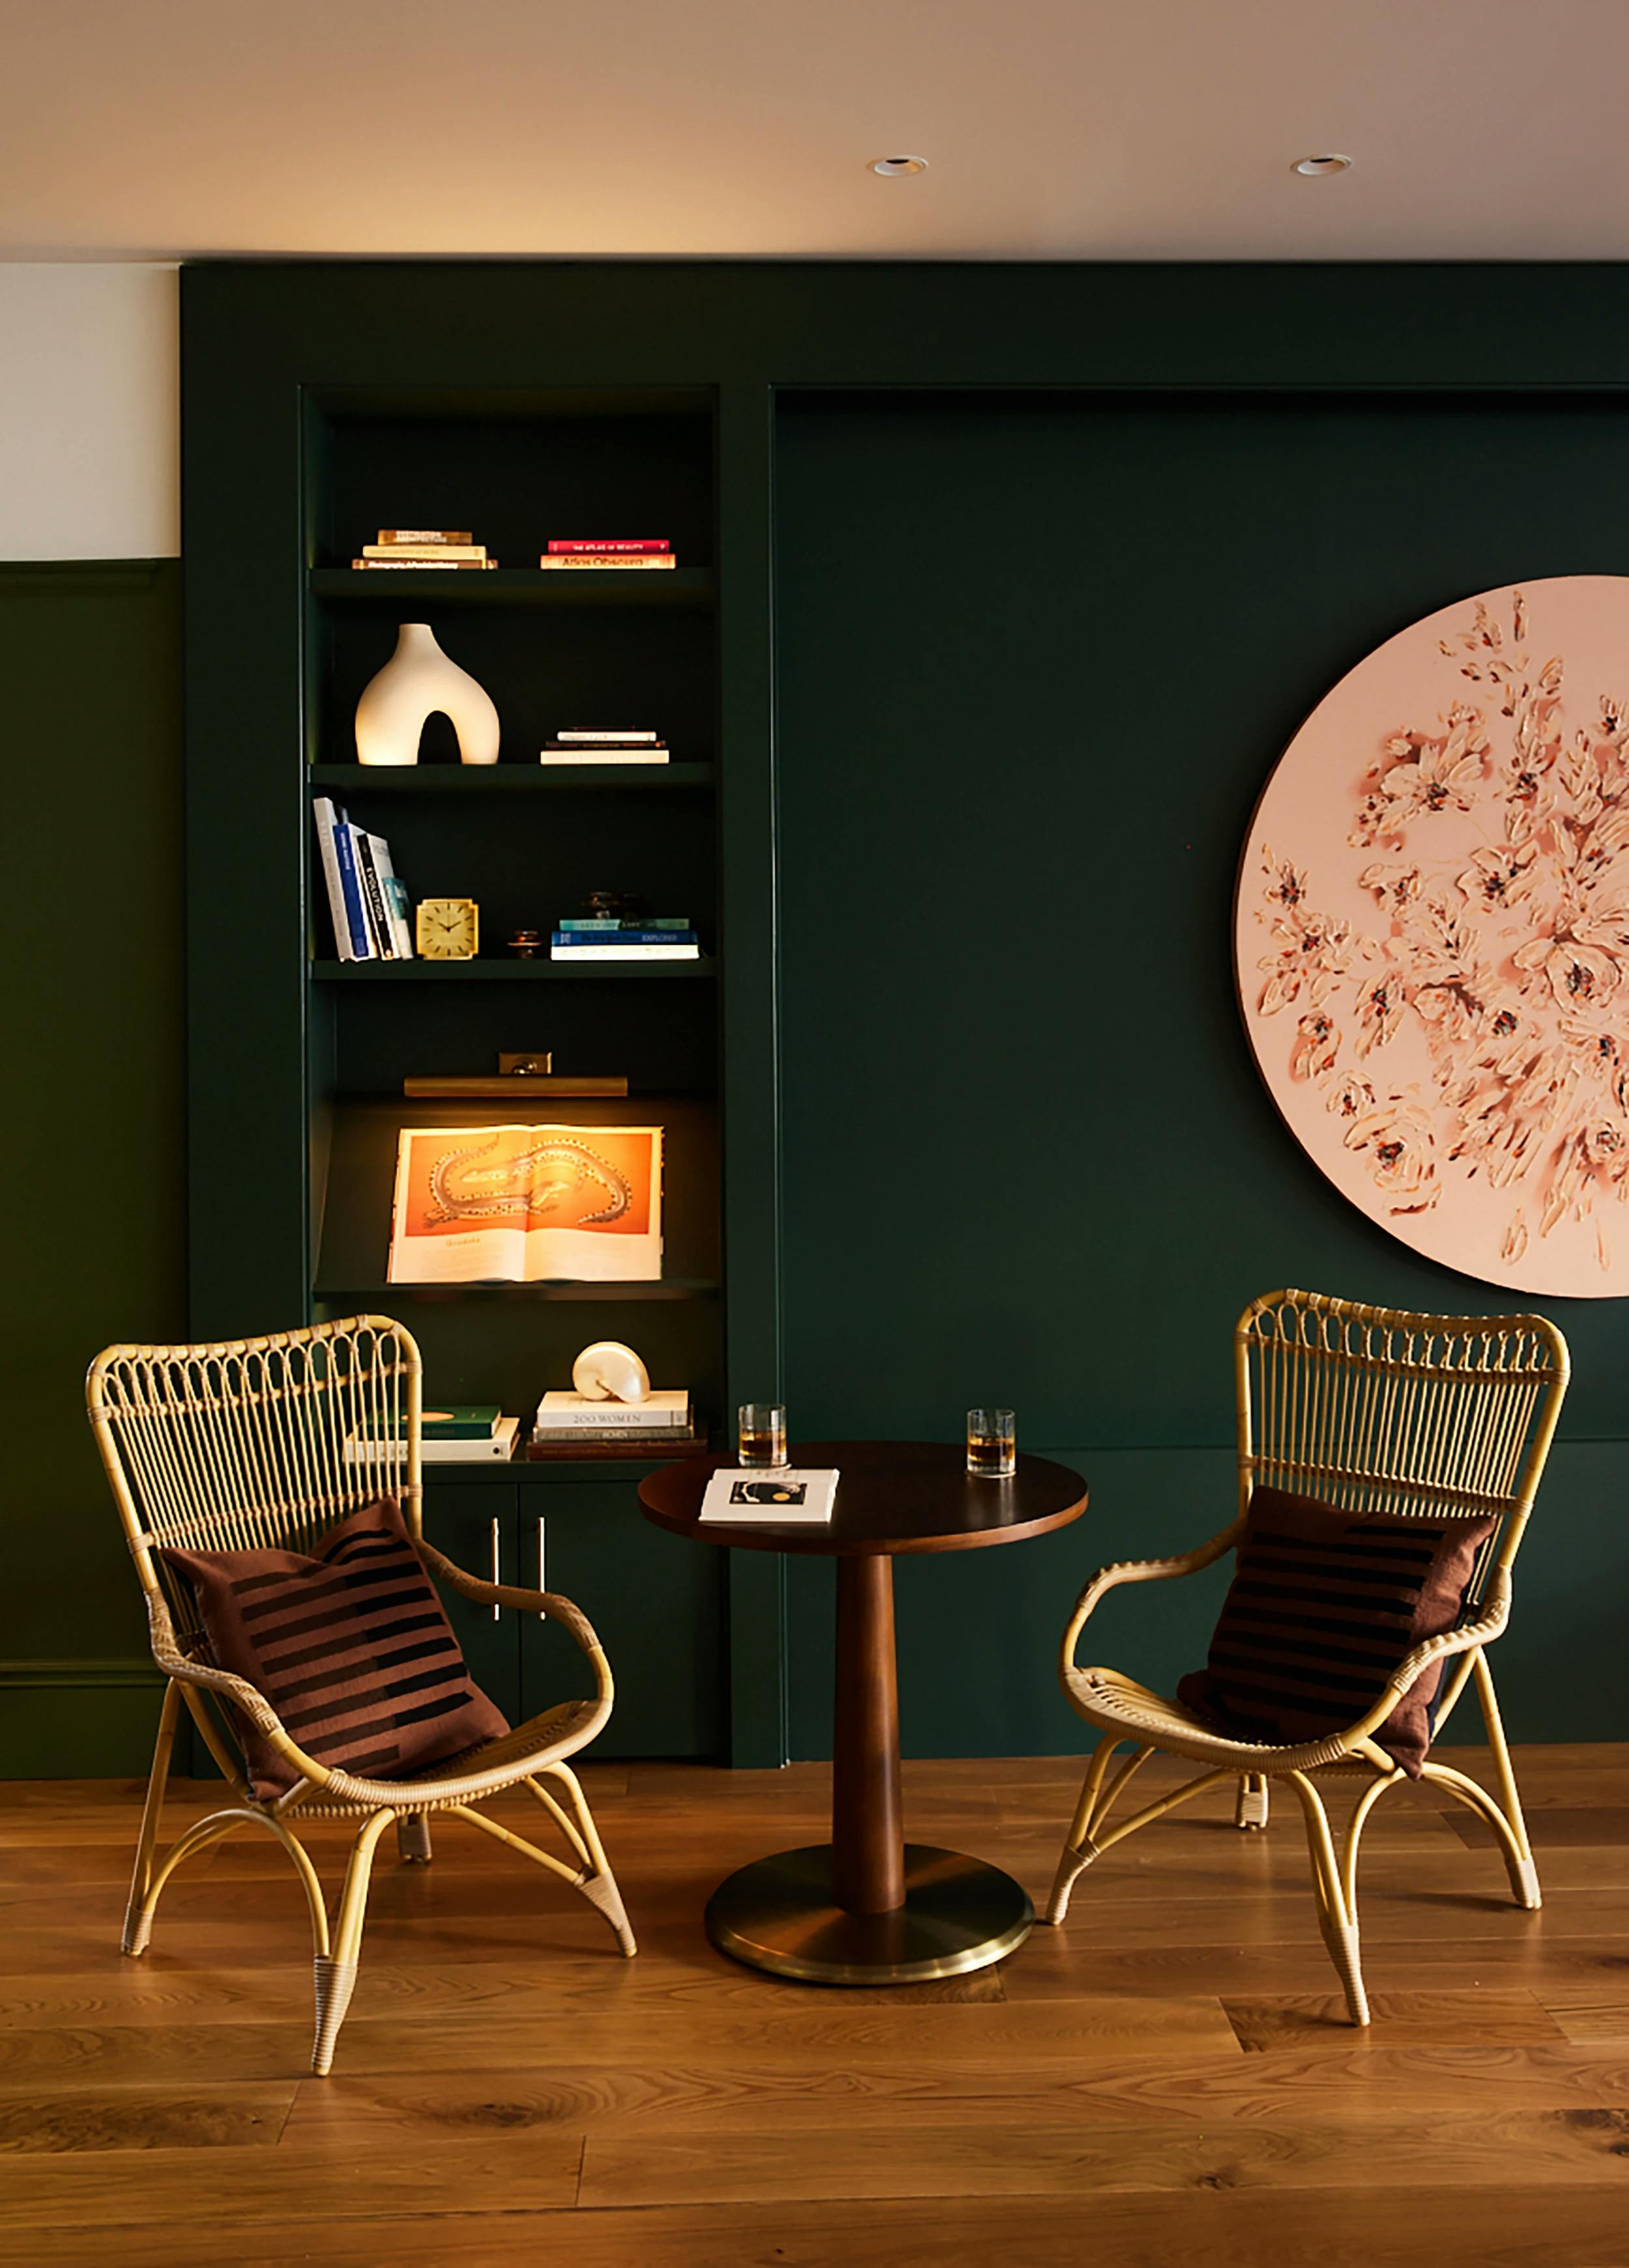 A circular painting with pink flowers by artist Erin Lynn Welsh installed on a dark green wall in the Chief San Francisco clubhouse.